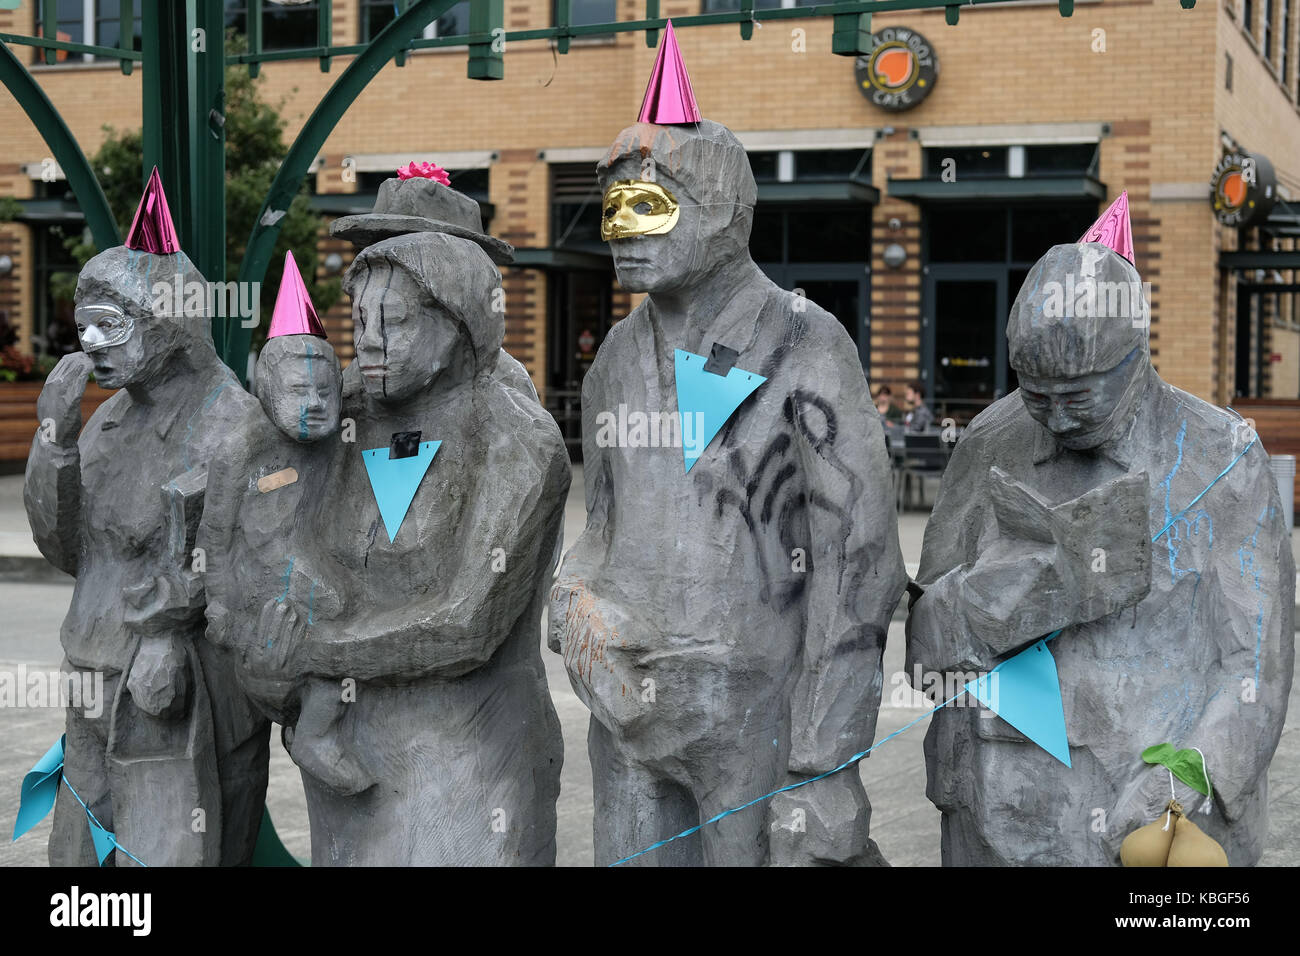 The sculpture 'Waiting for the Interurban' in the Fremont area of Seattle, Washington, USA. Stock Photo